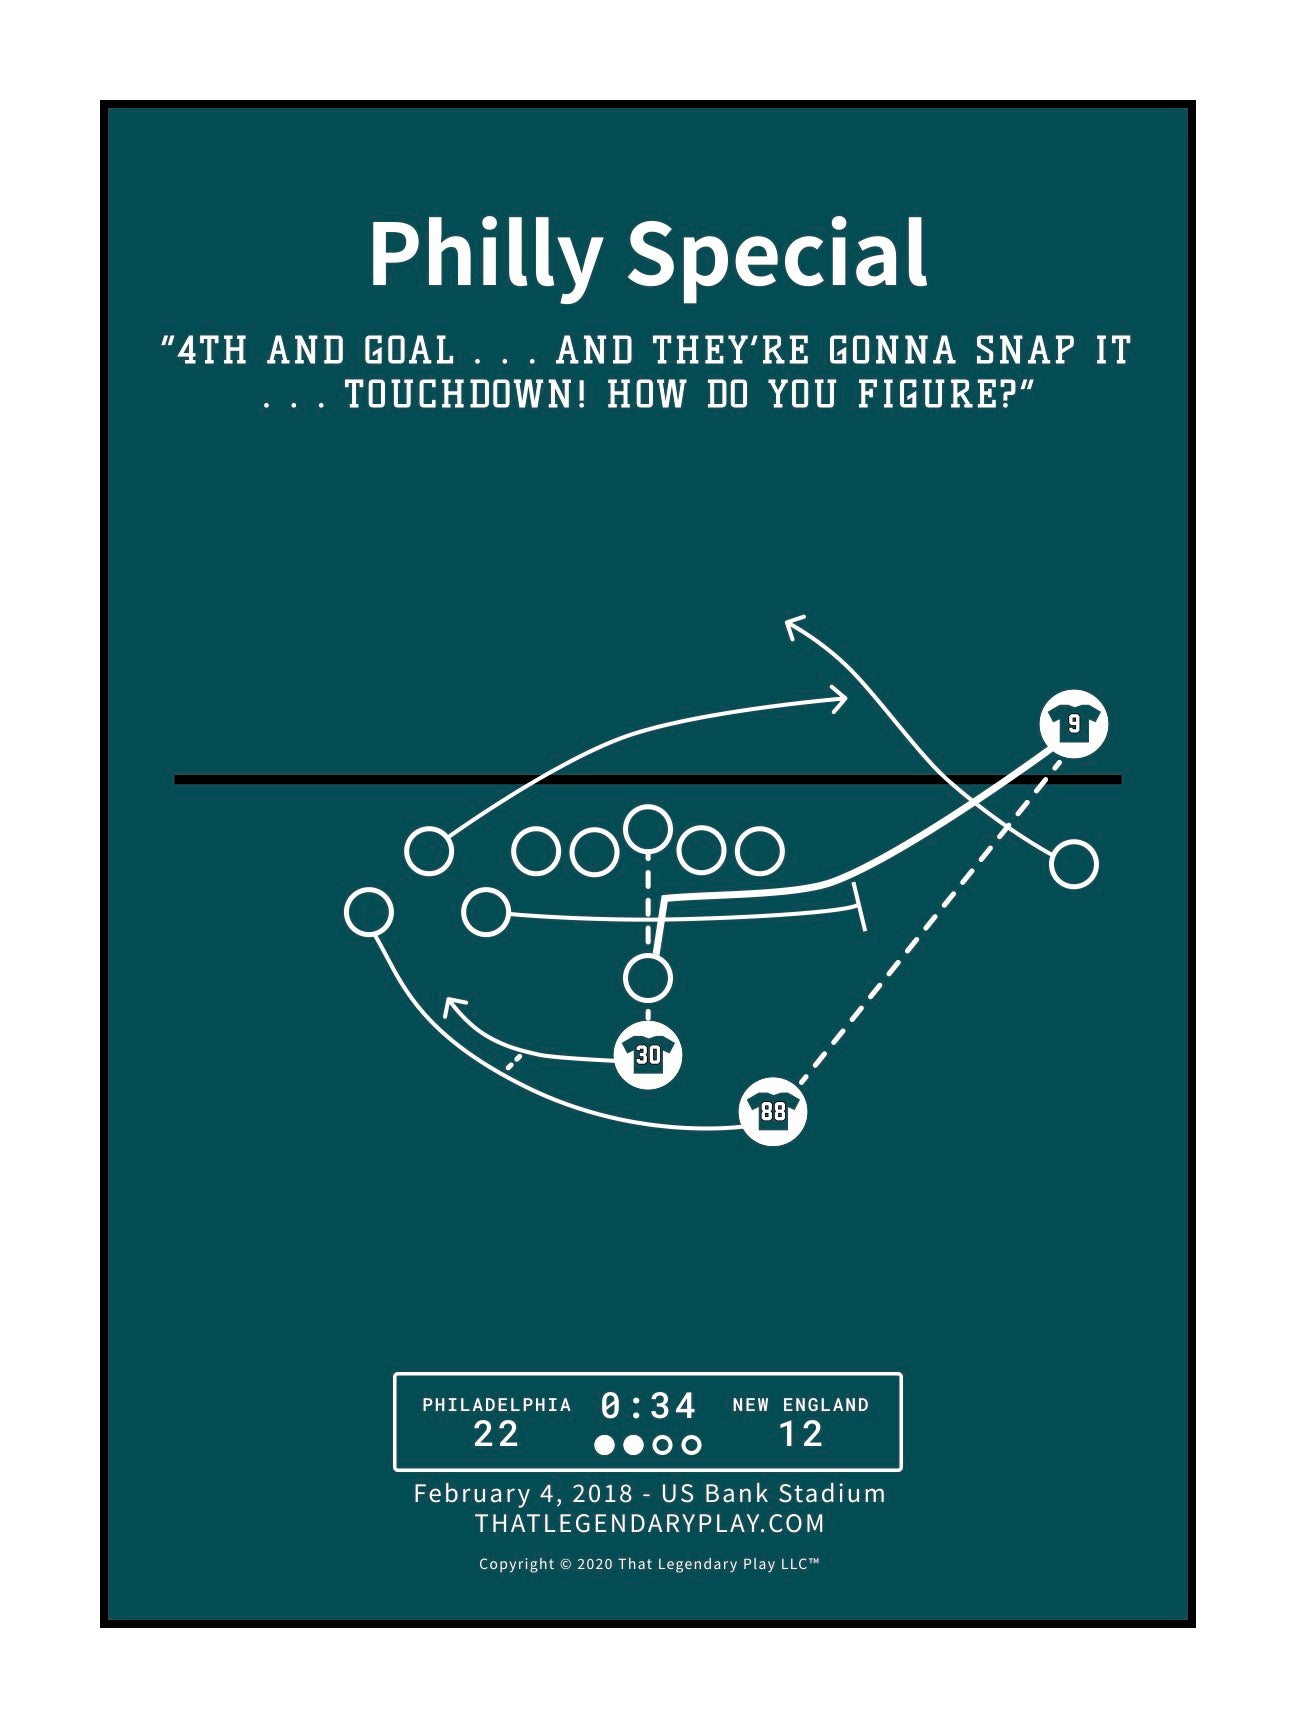 Philadelphia Eagles the philly special super bowl champions shirt